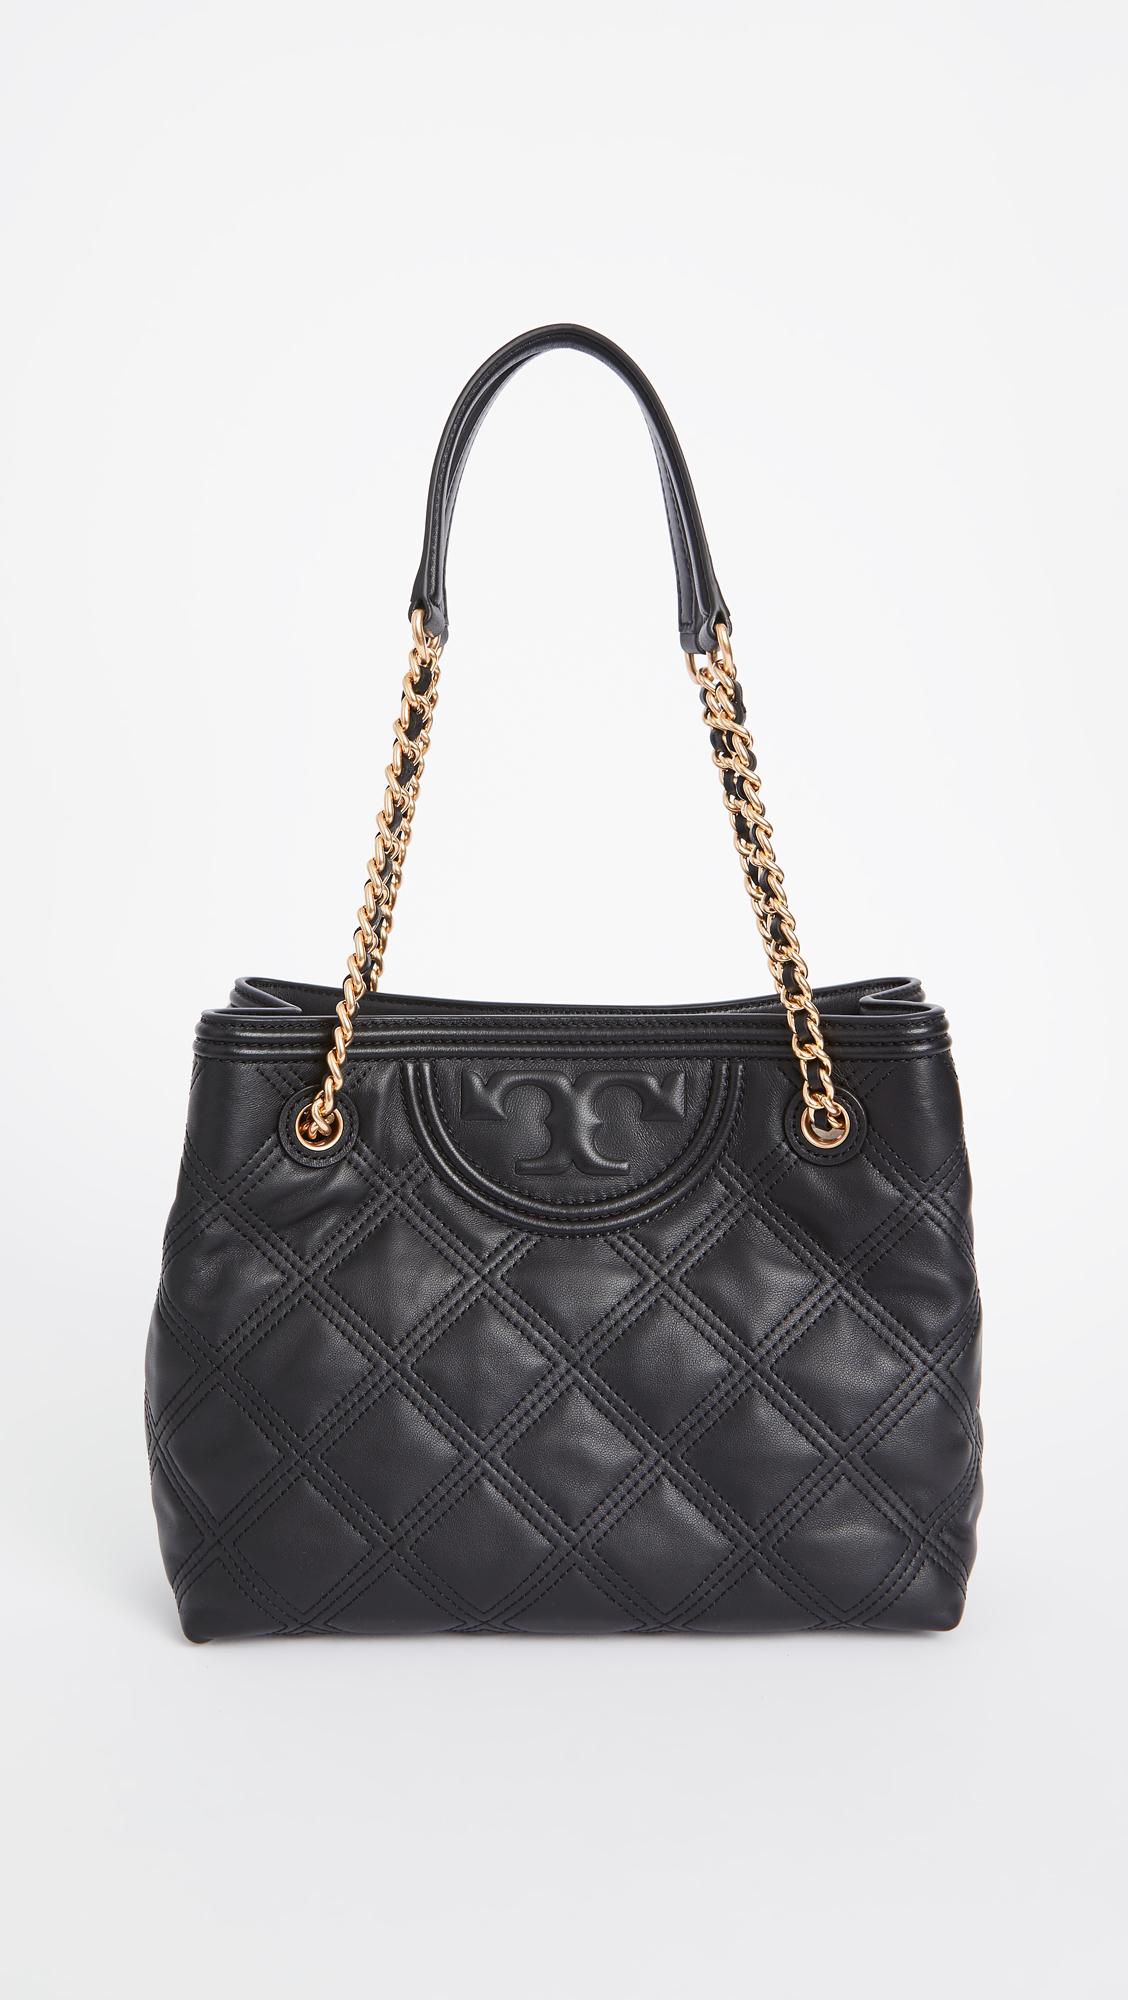 Tory Burch Leather Fleming Soft Small Tote in Black - Lyst